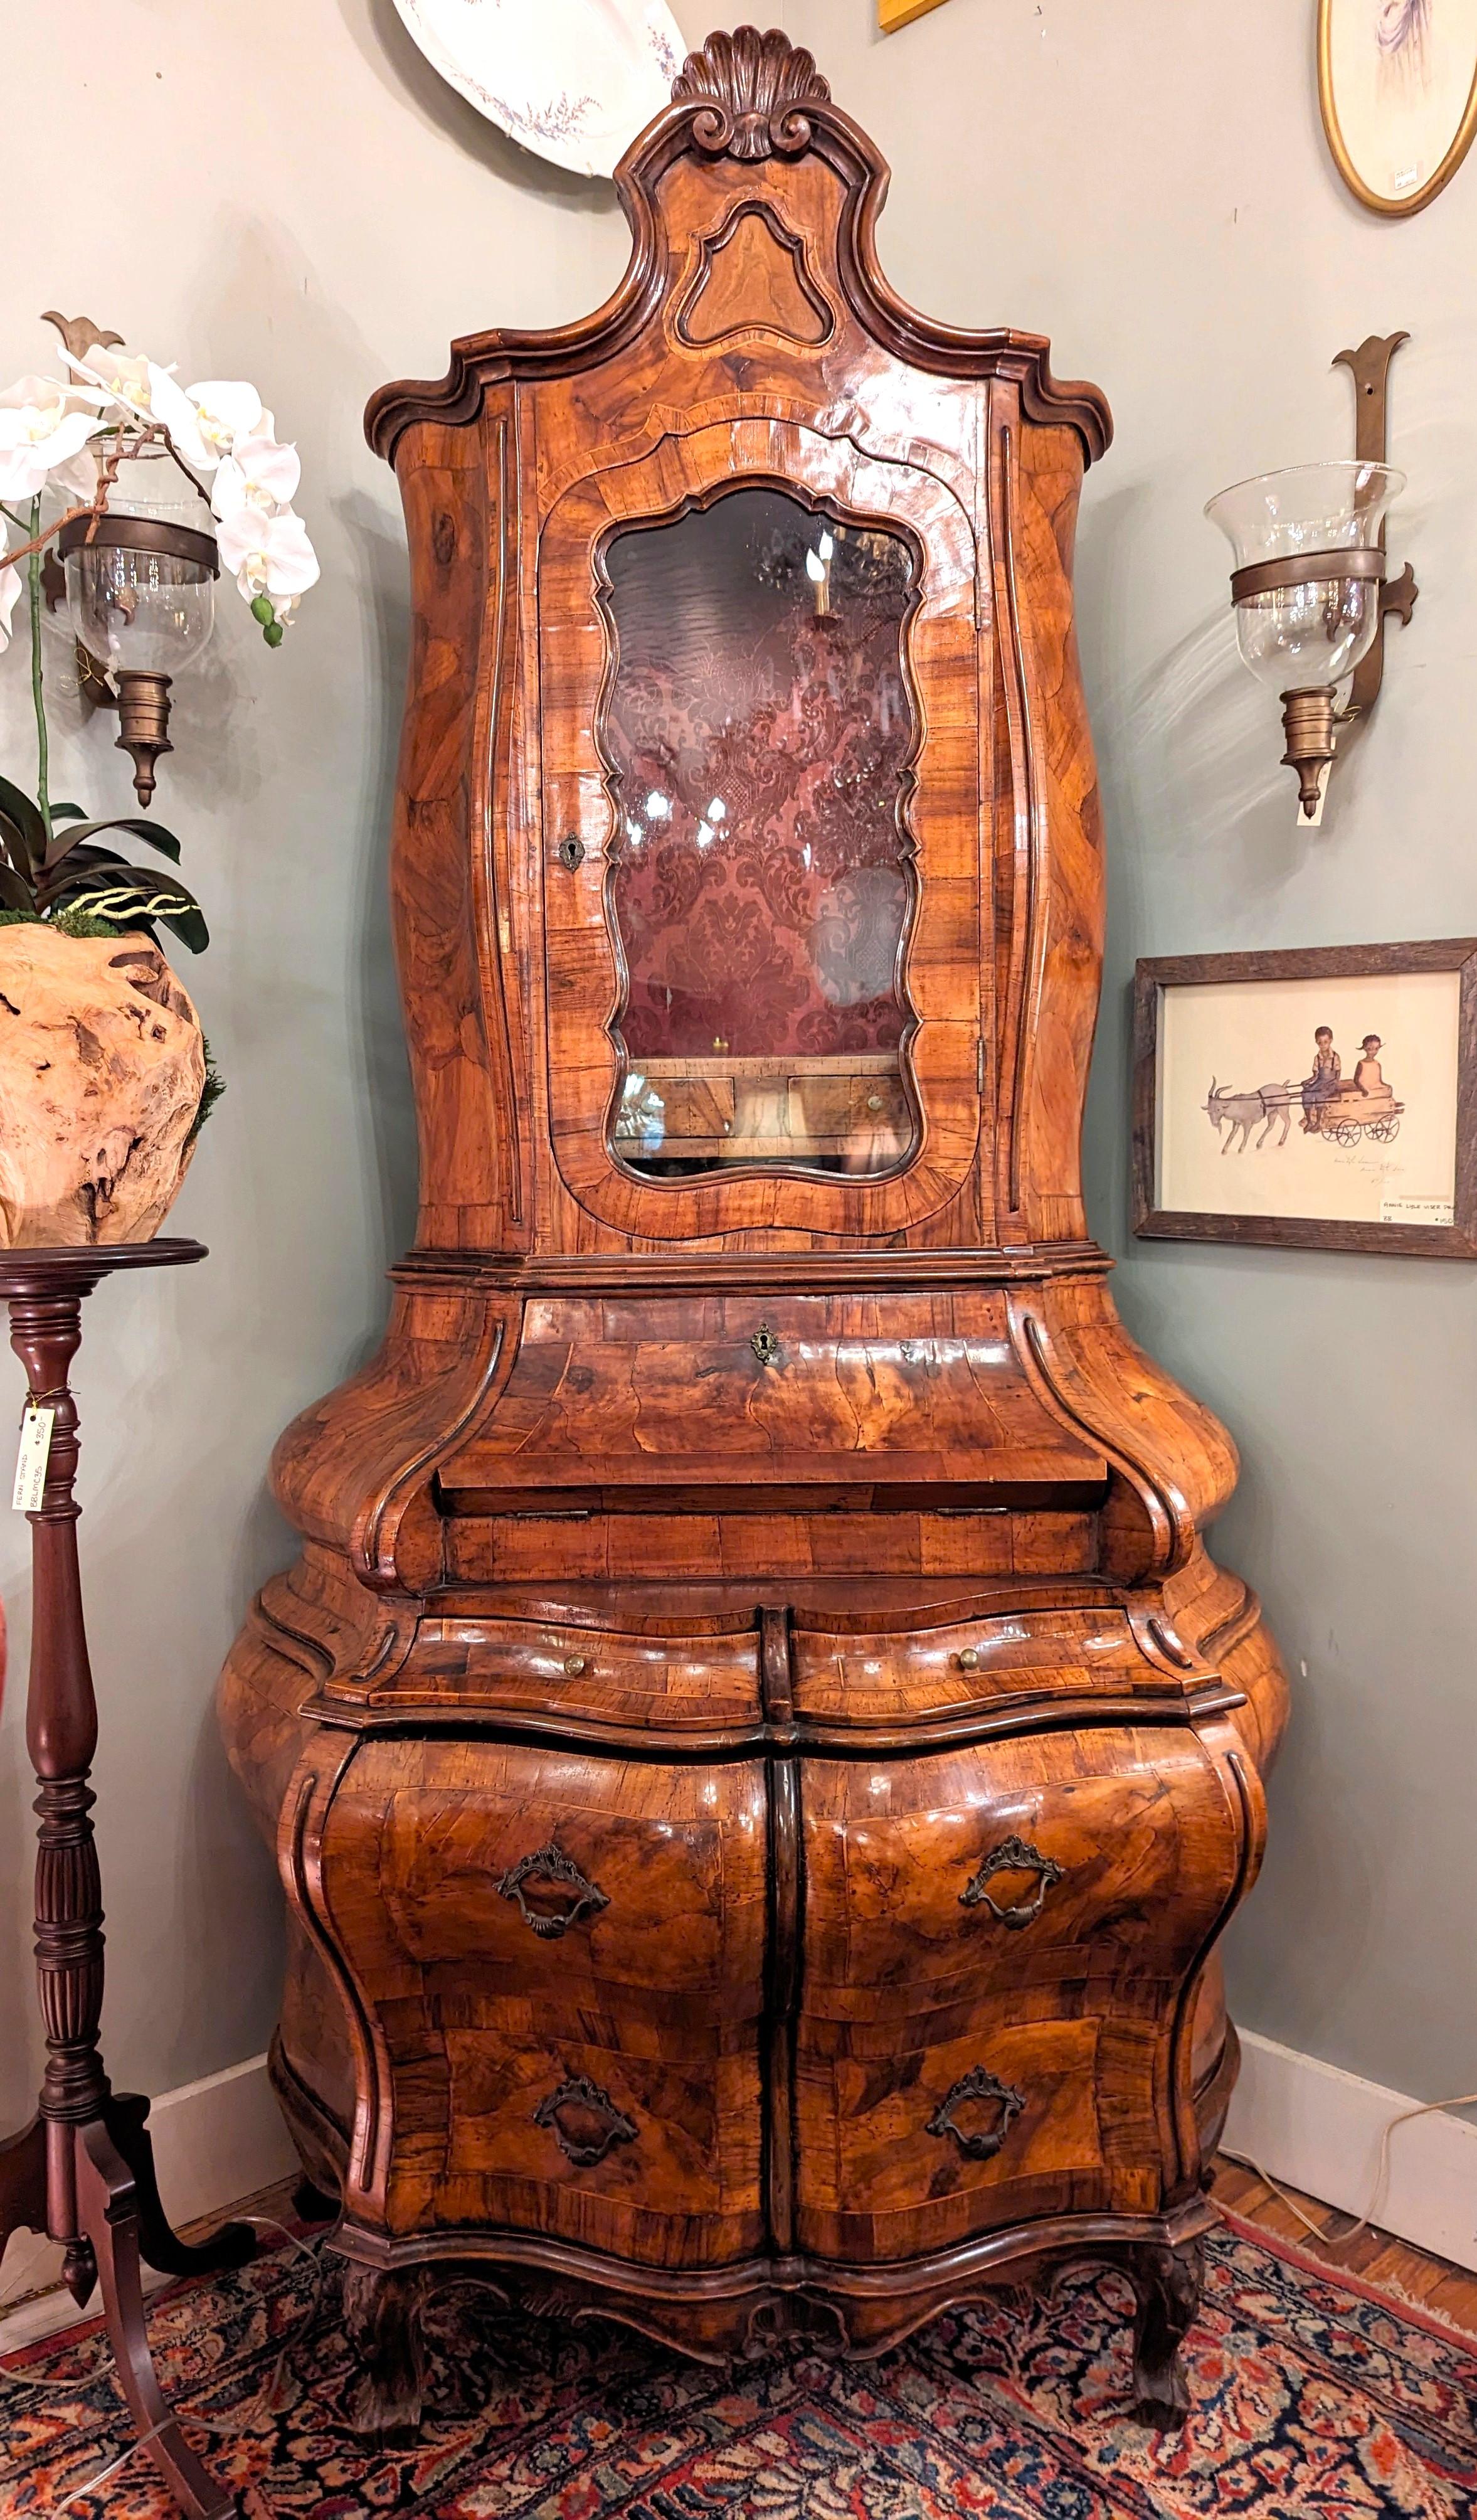 Attractive Italian Rococo style burl wood veneer secretary cabinet, circa early 20th century.
Double bodied with the top part of the cabinet over a slant-front desk with writing compartments. Stunning bombe form, several drawers adorned with bronze